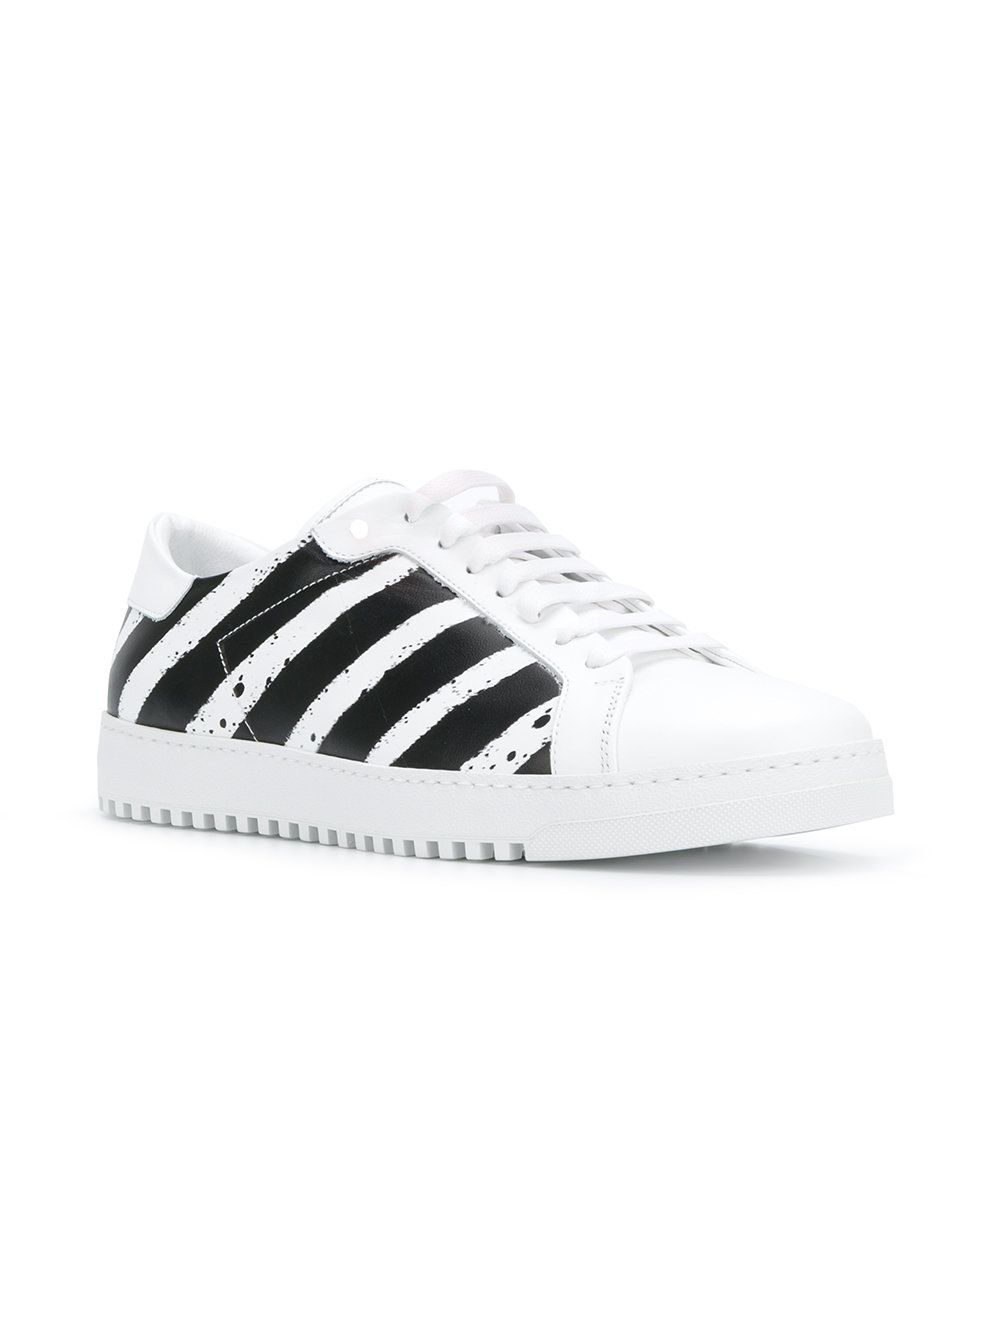 Off-White Striped Sneakers, $823 